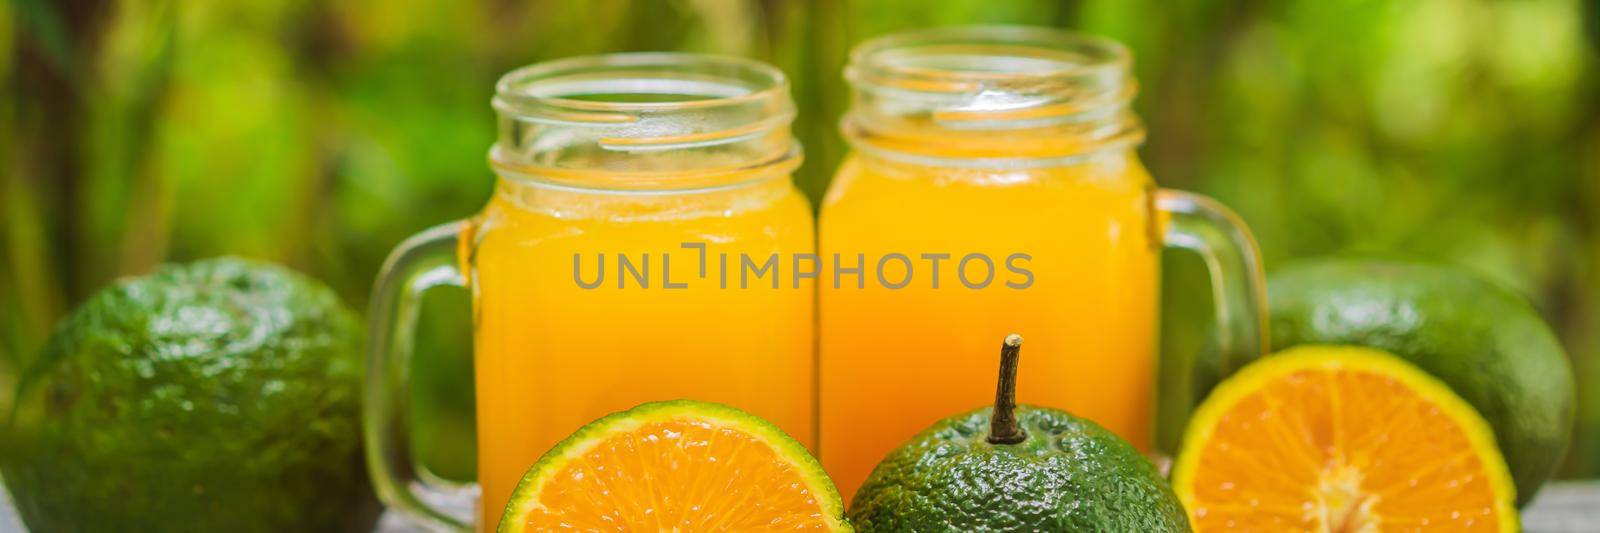 Orange juice and oranges with green peel on a wooden background. BANNER, LONG FORMAT